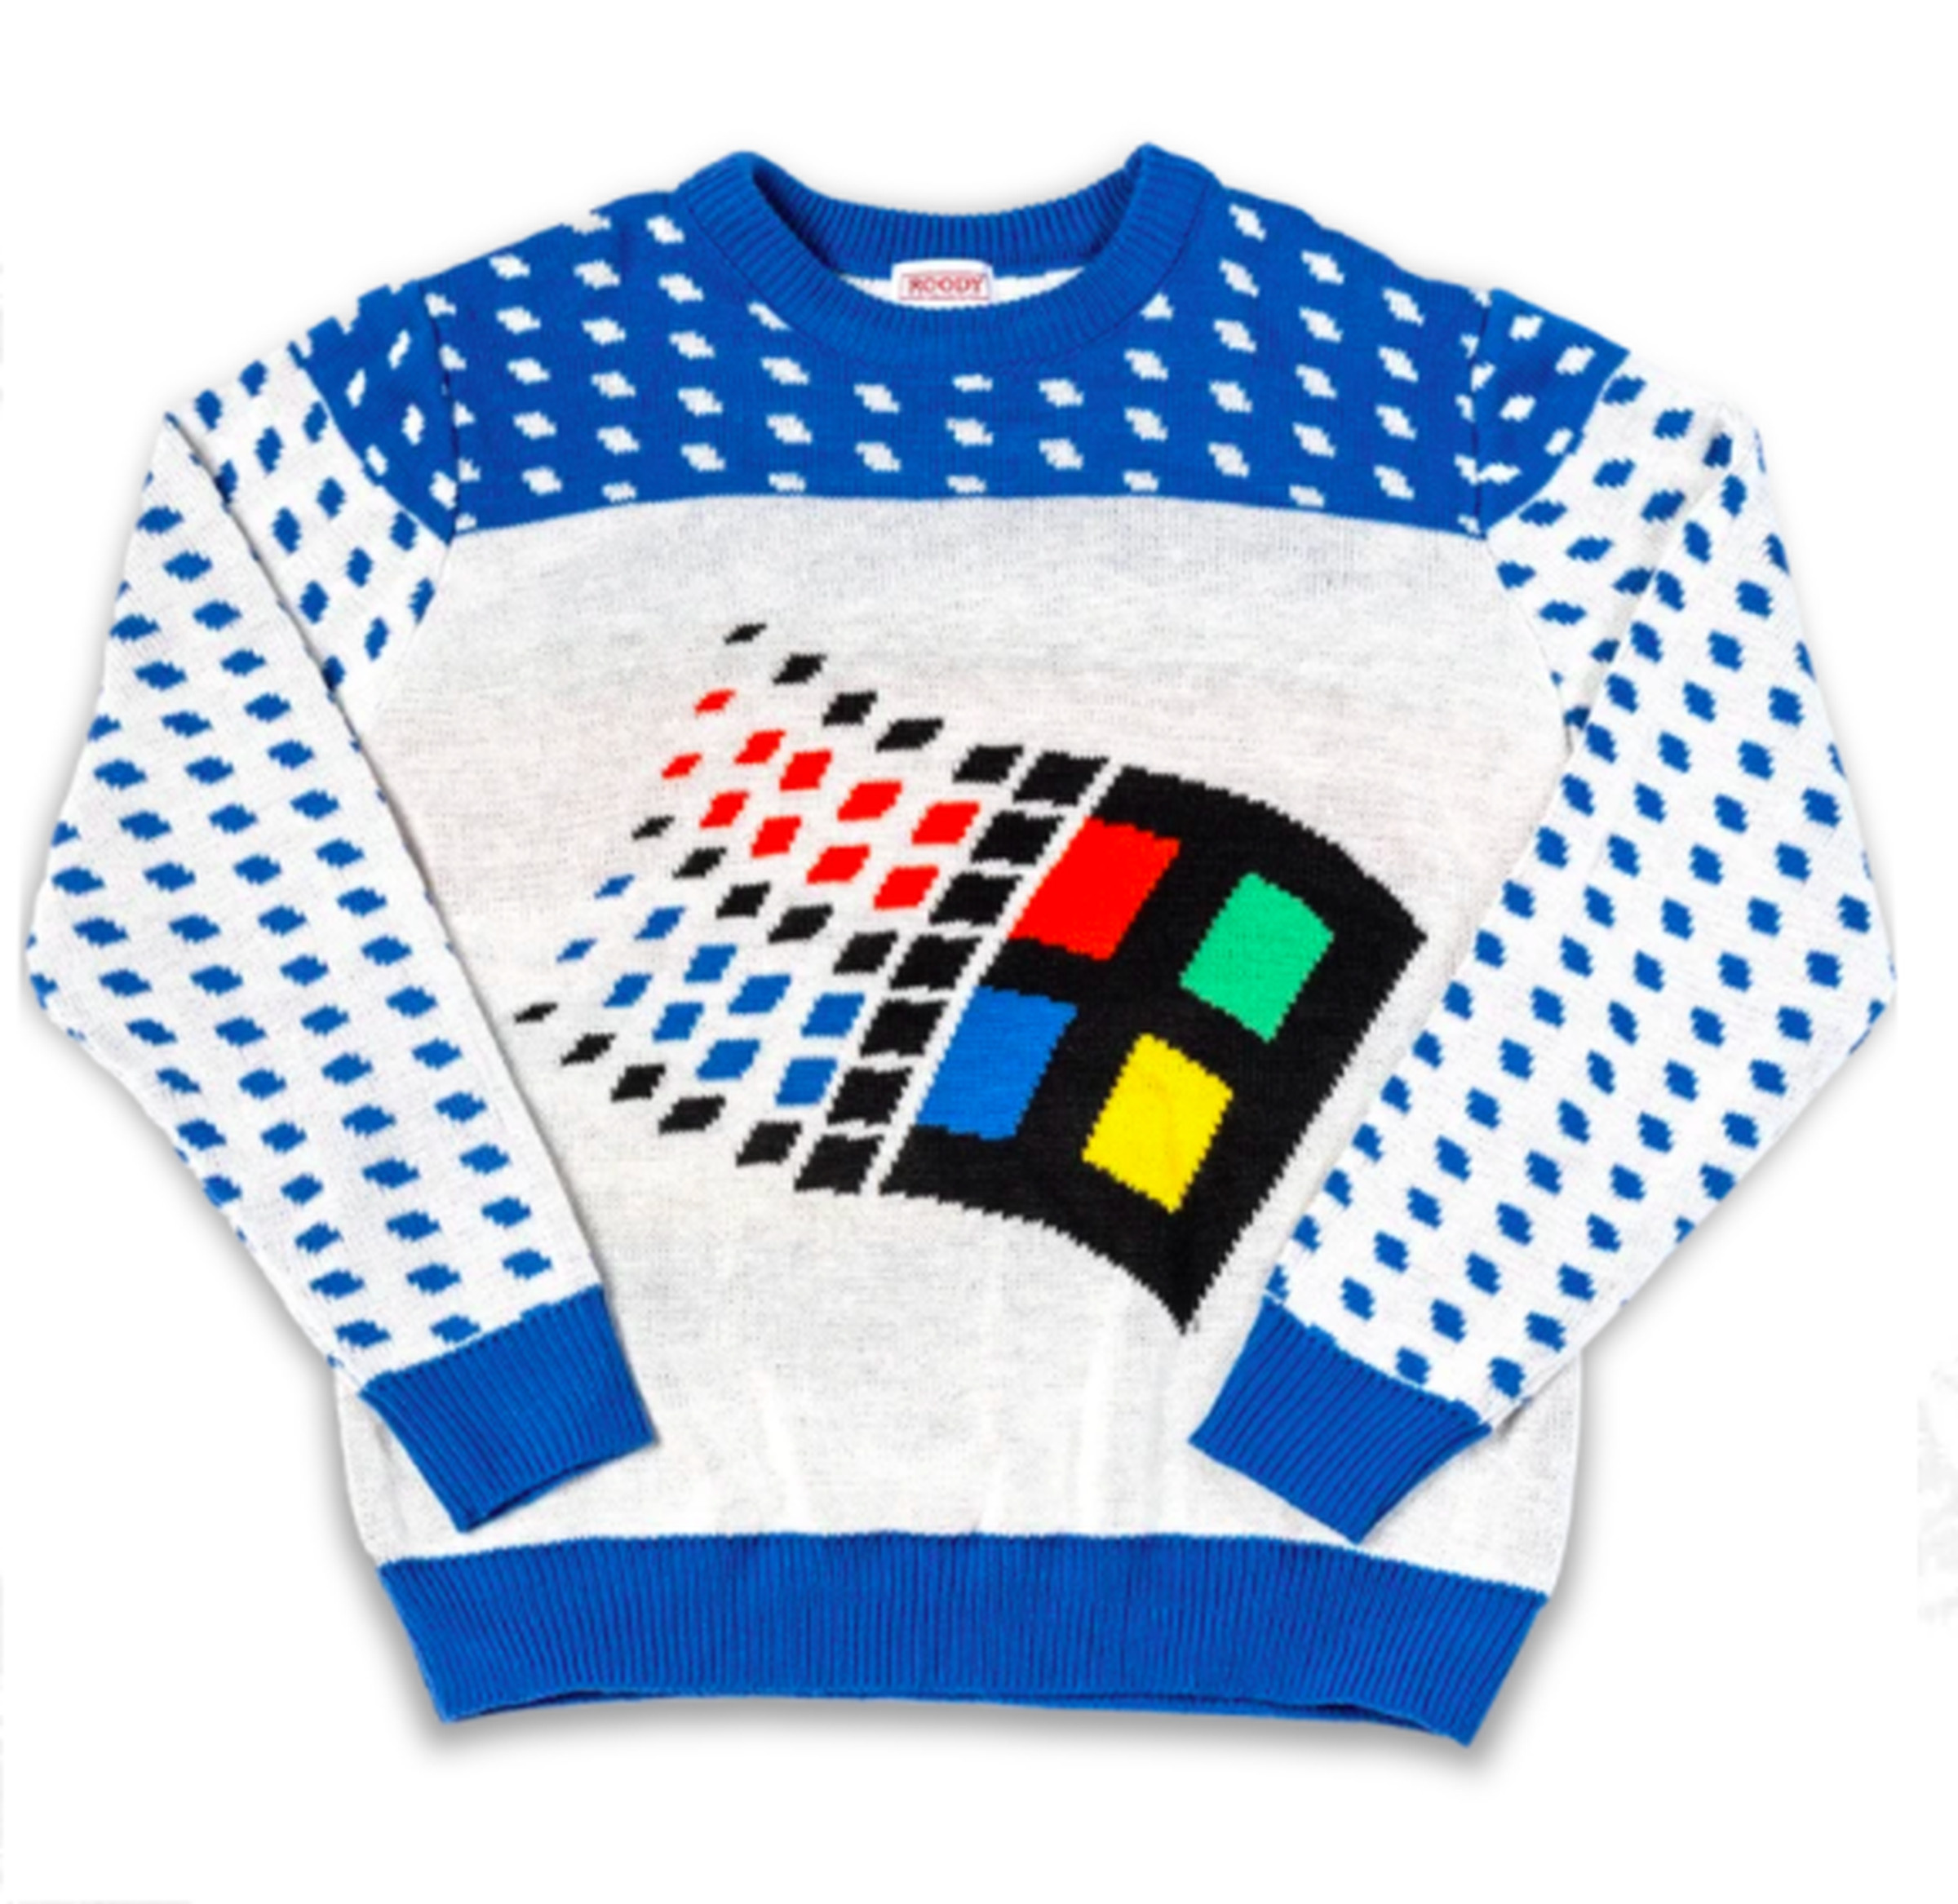 The Windows 95 ugly sweater that started it all is still one of the most popular.